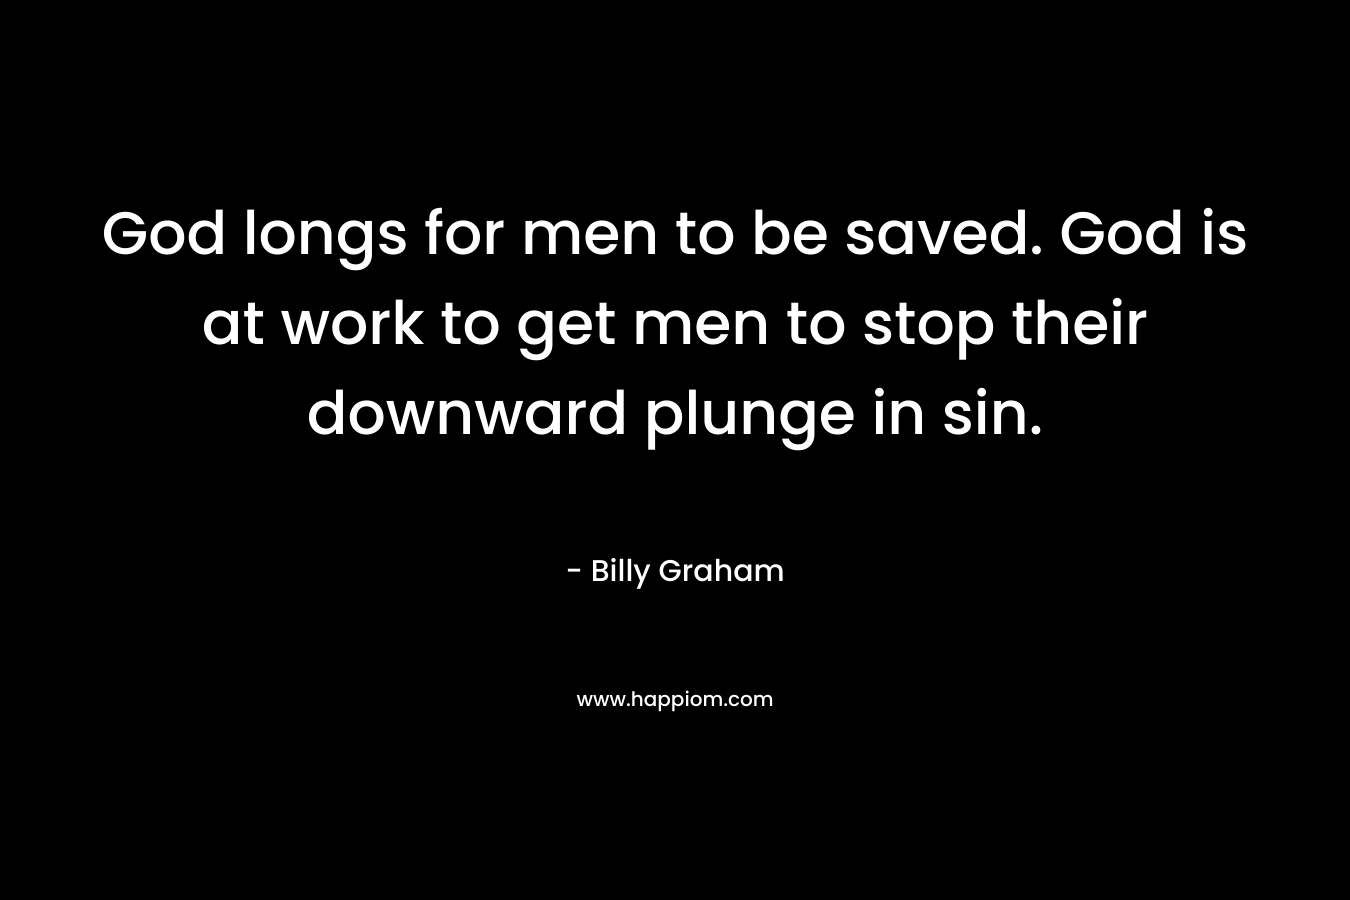 God longs for men to be saved. God is at work to get men to stop their downward plunge in sin.